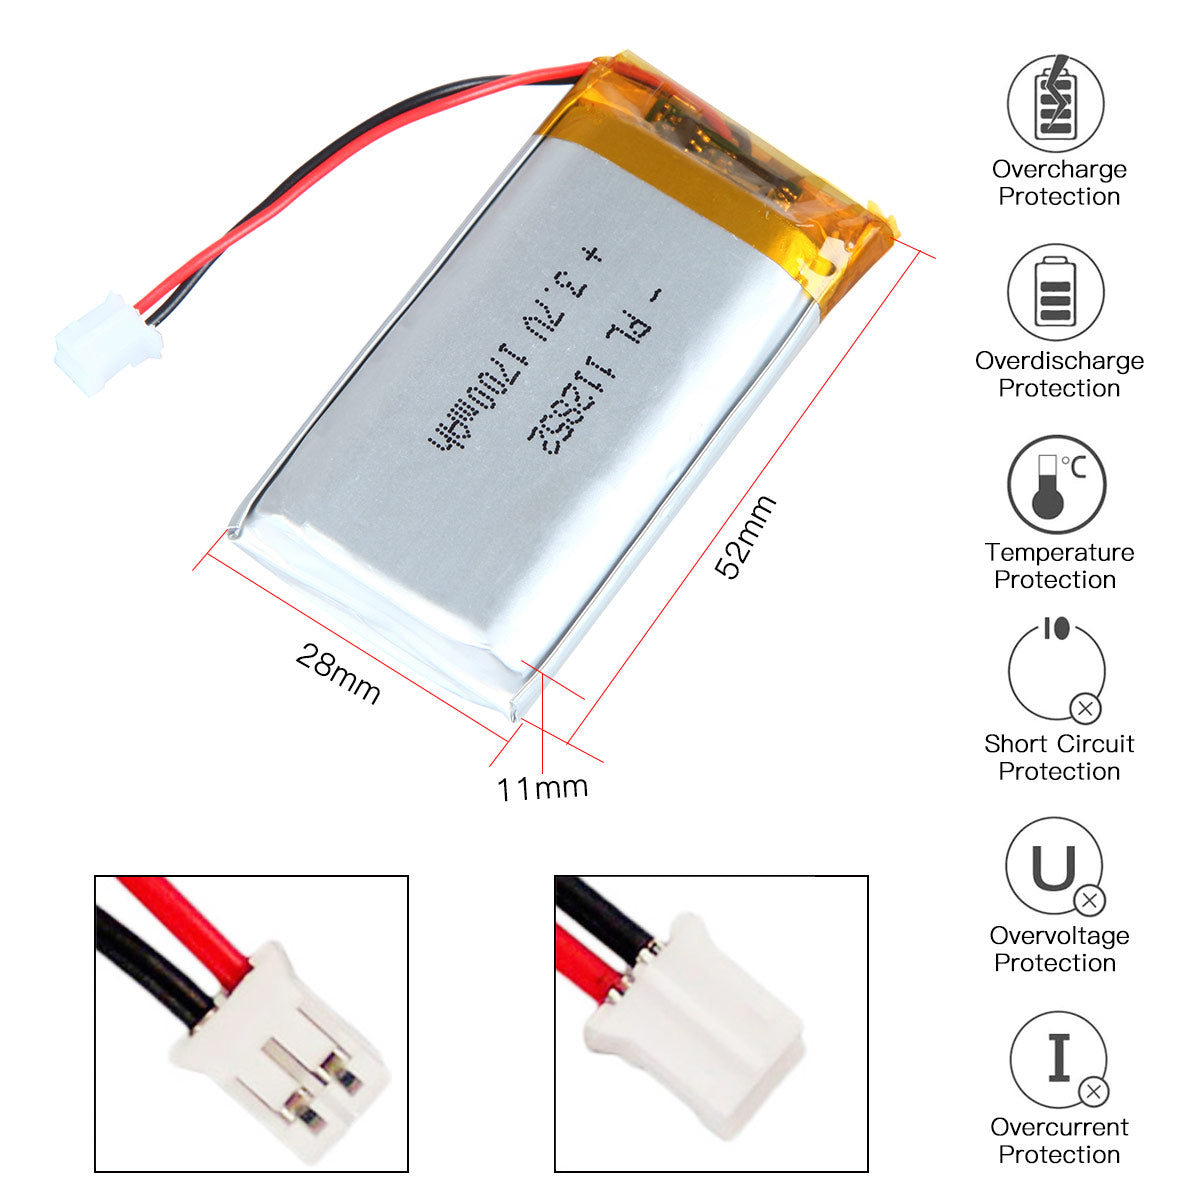 YDL 3.7V 1700mAh 112852 Rechargeable Lipo Battery with JST Connector - YDL Battery